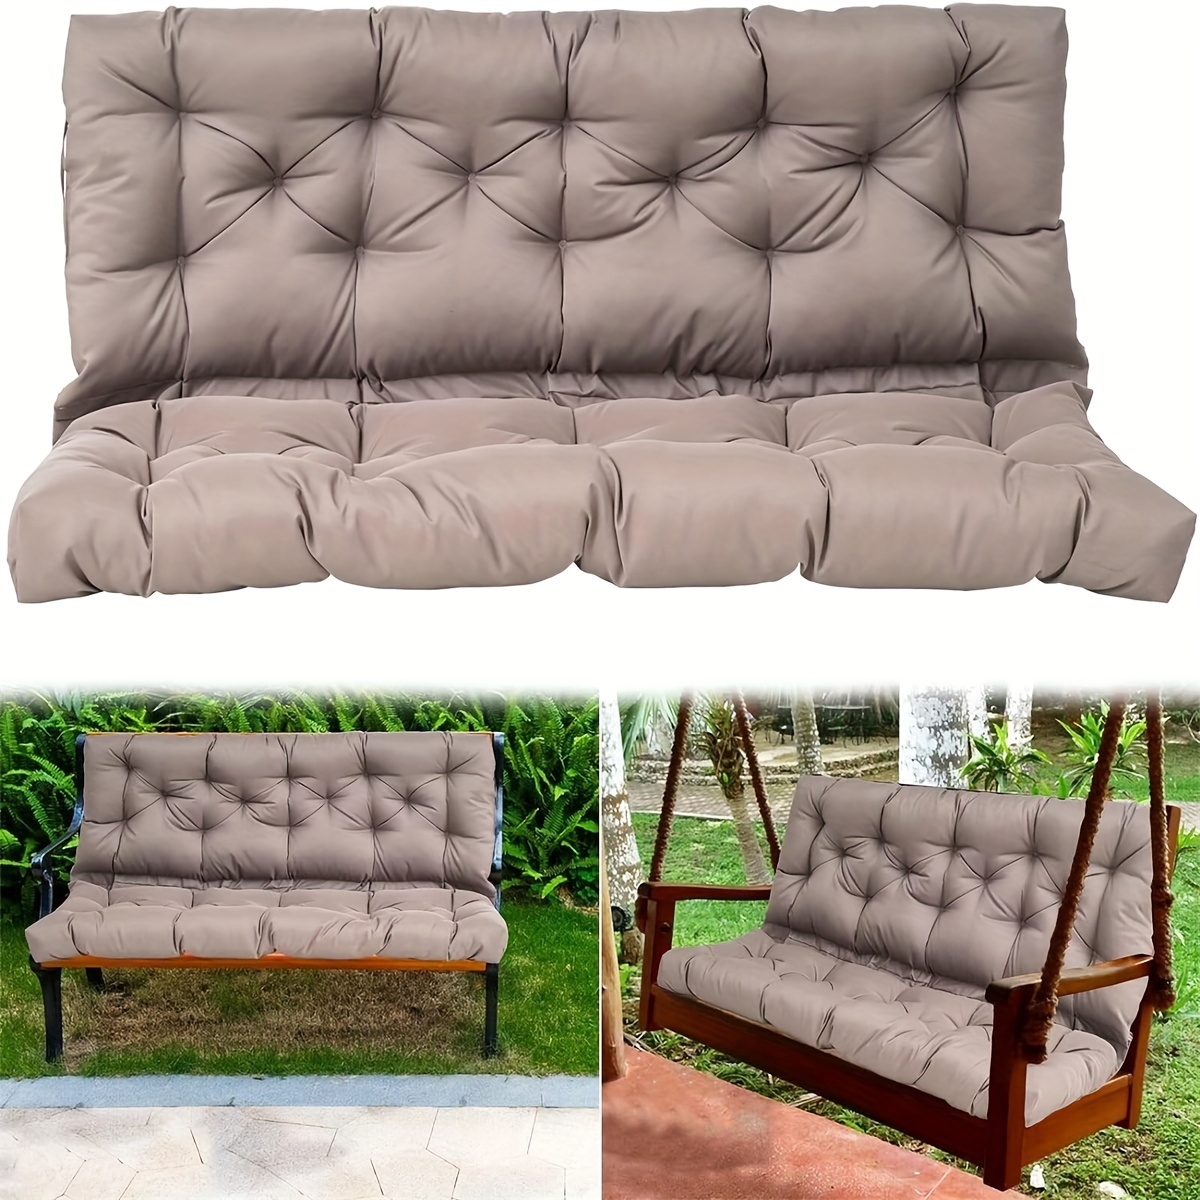 

Outdoor Swing Cushions Waterproof Swing Cushions 3 Seater Replacement With Backrest Outdoor Thickened Bench Cushion With Ties For Porch Patio Backyard Garden 60 * 40 In